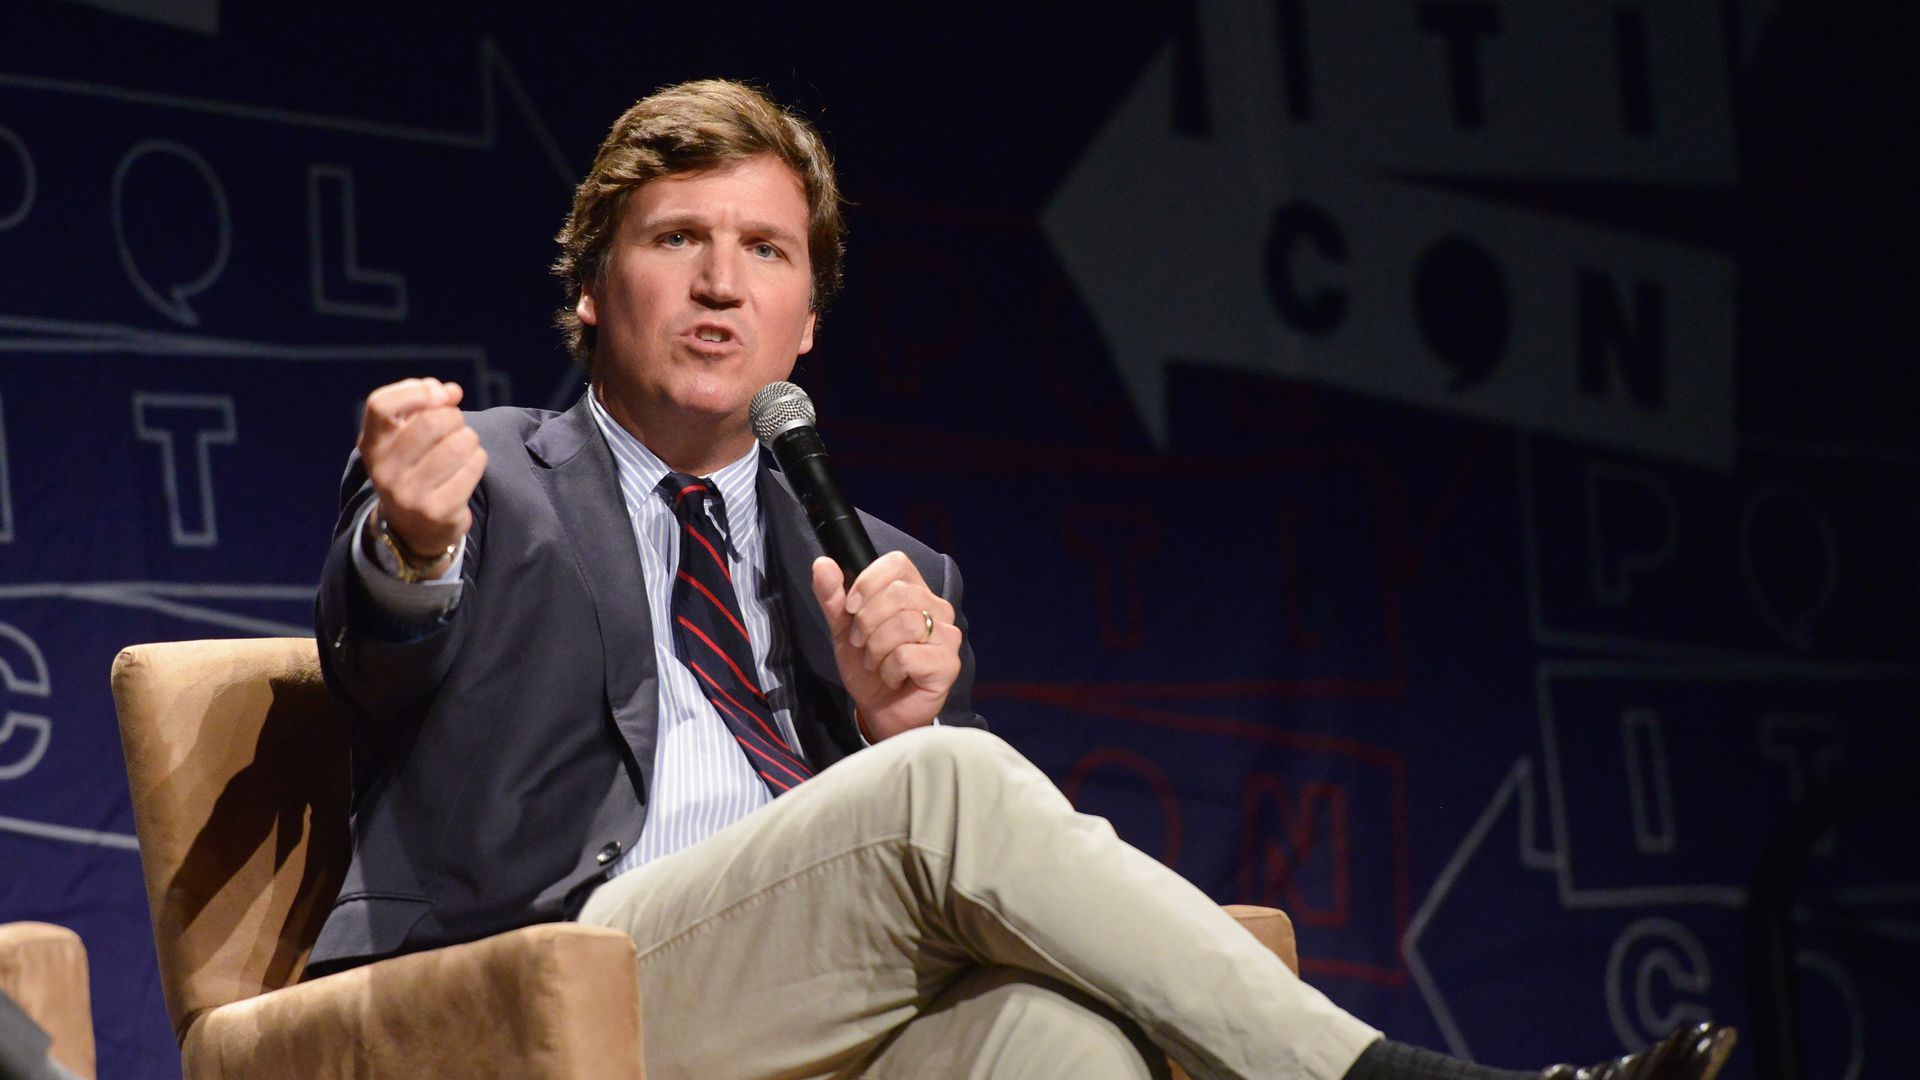 Tucker Carlson speaks at an event